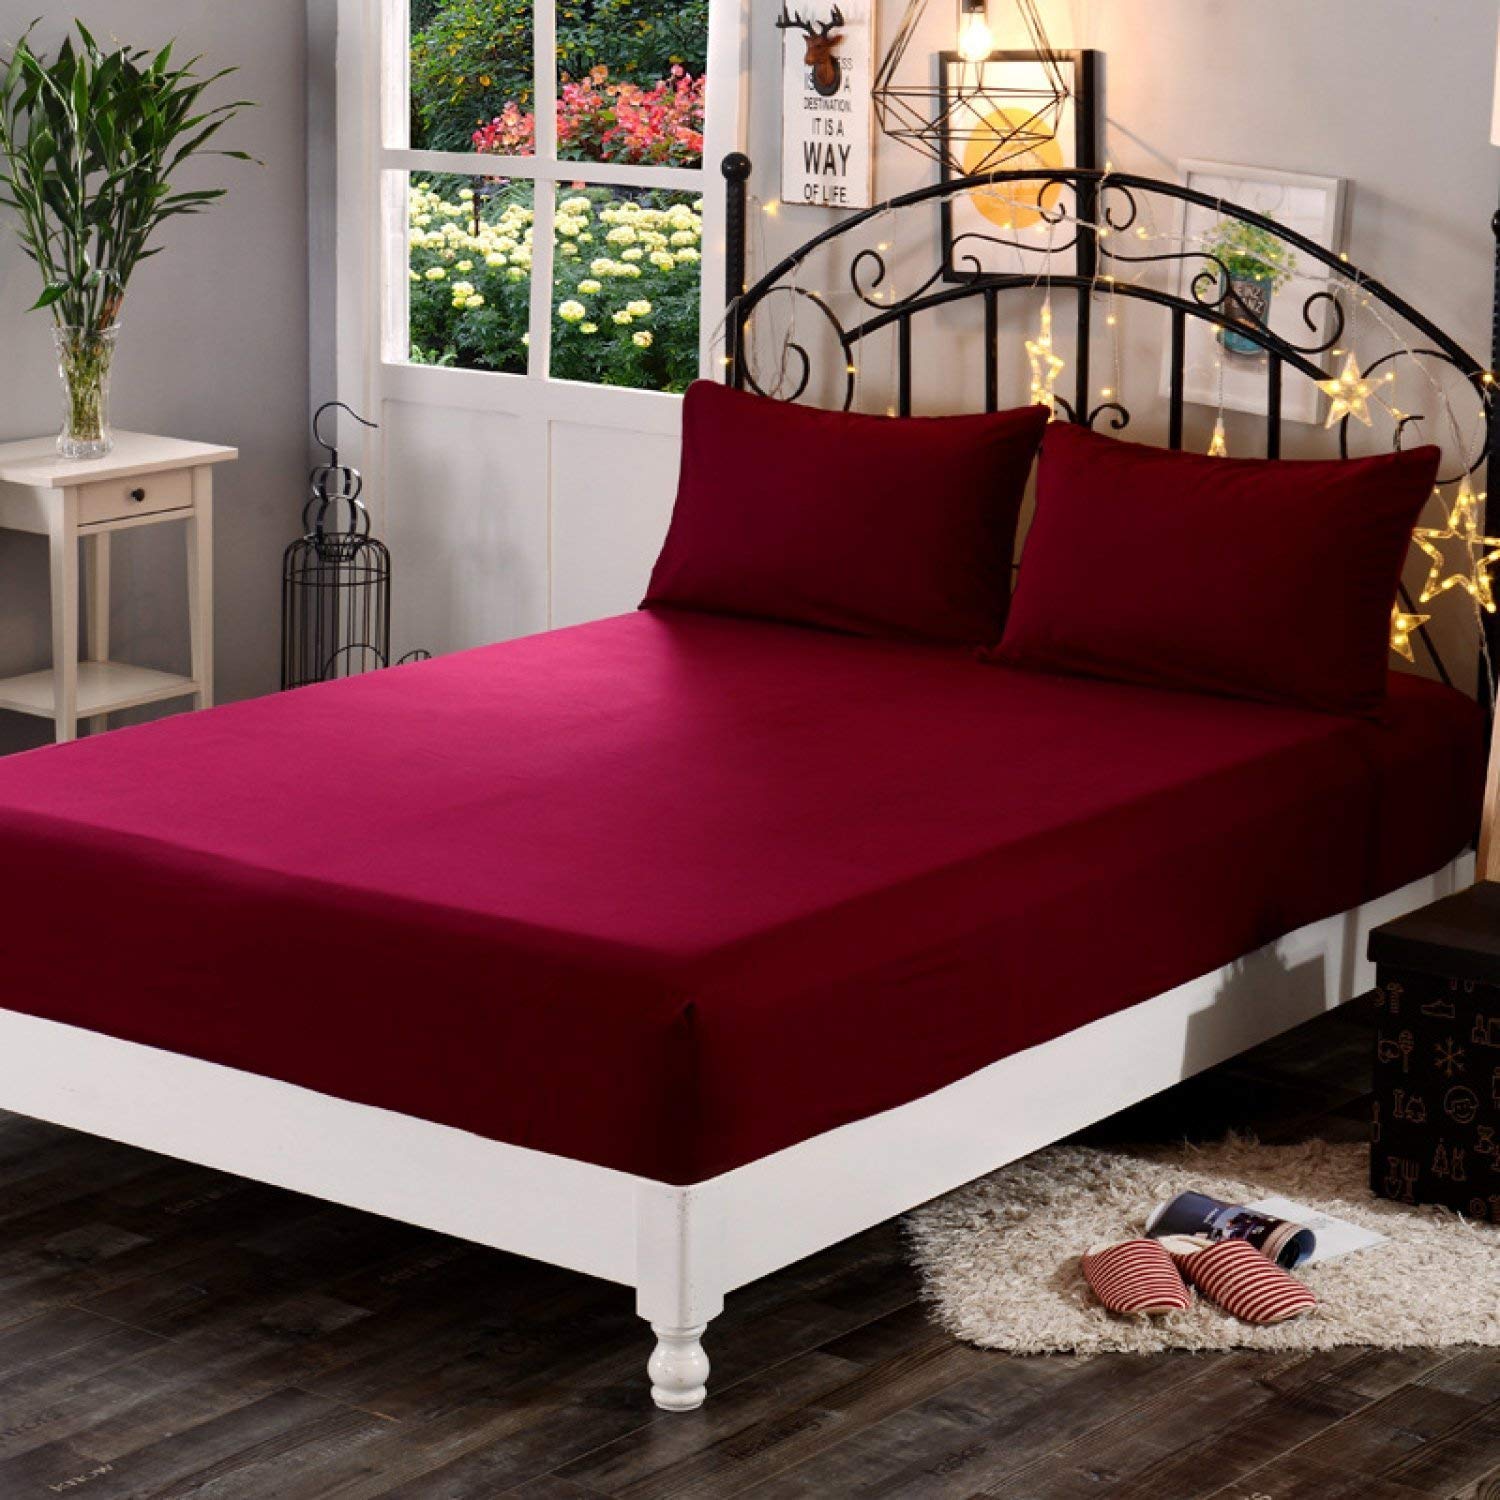 100% Waterproof Terry Cotton Fitted Mattress Protector for King Size Bed (78 x 72 Inch, Maroon)